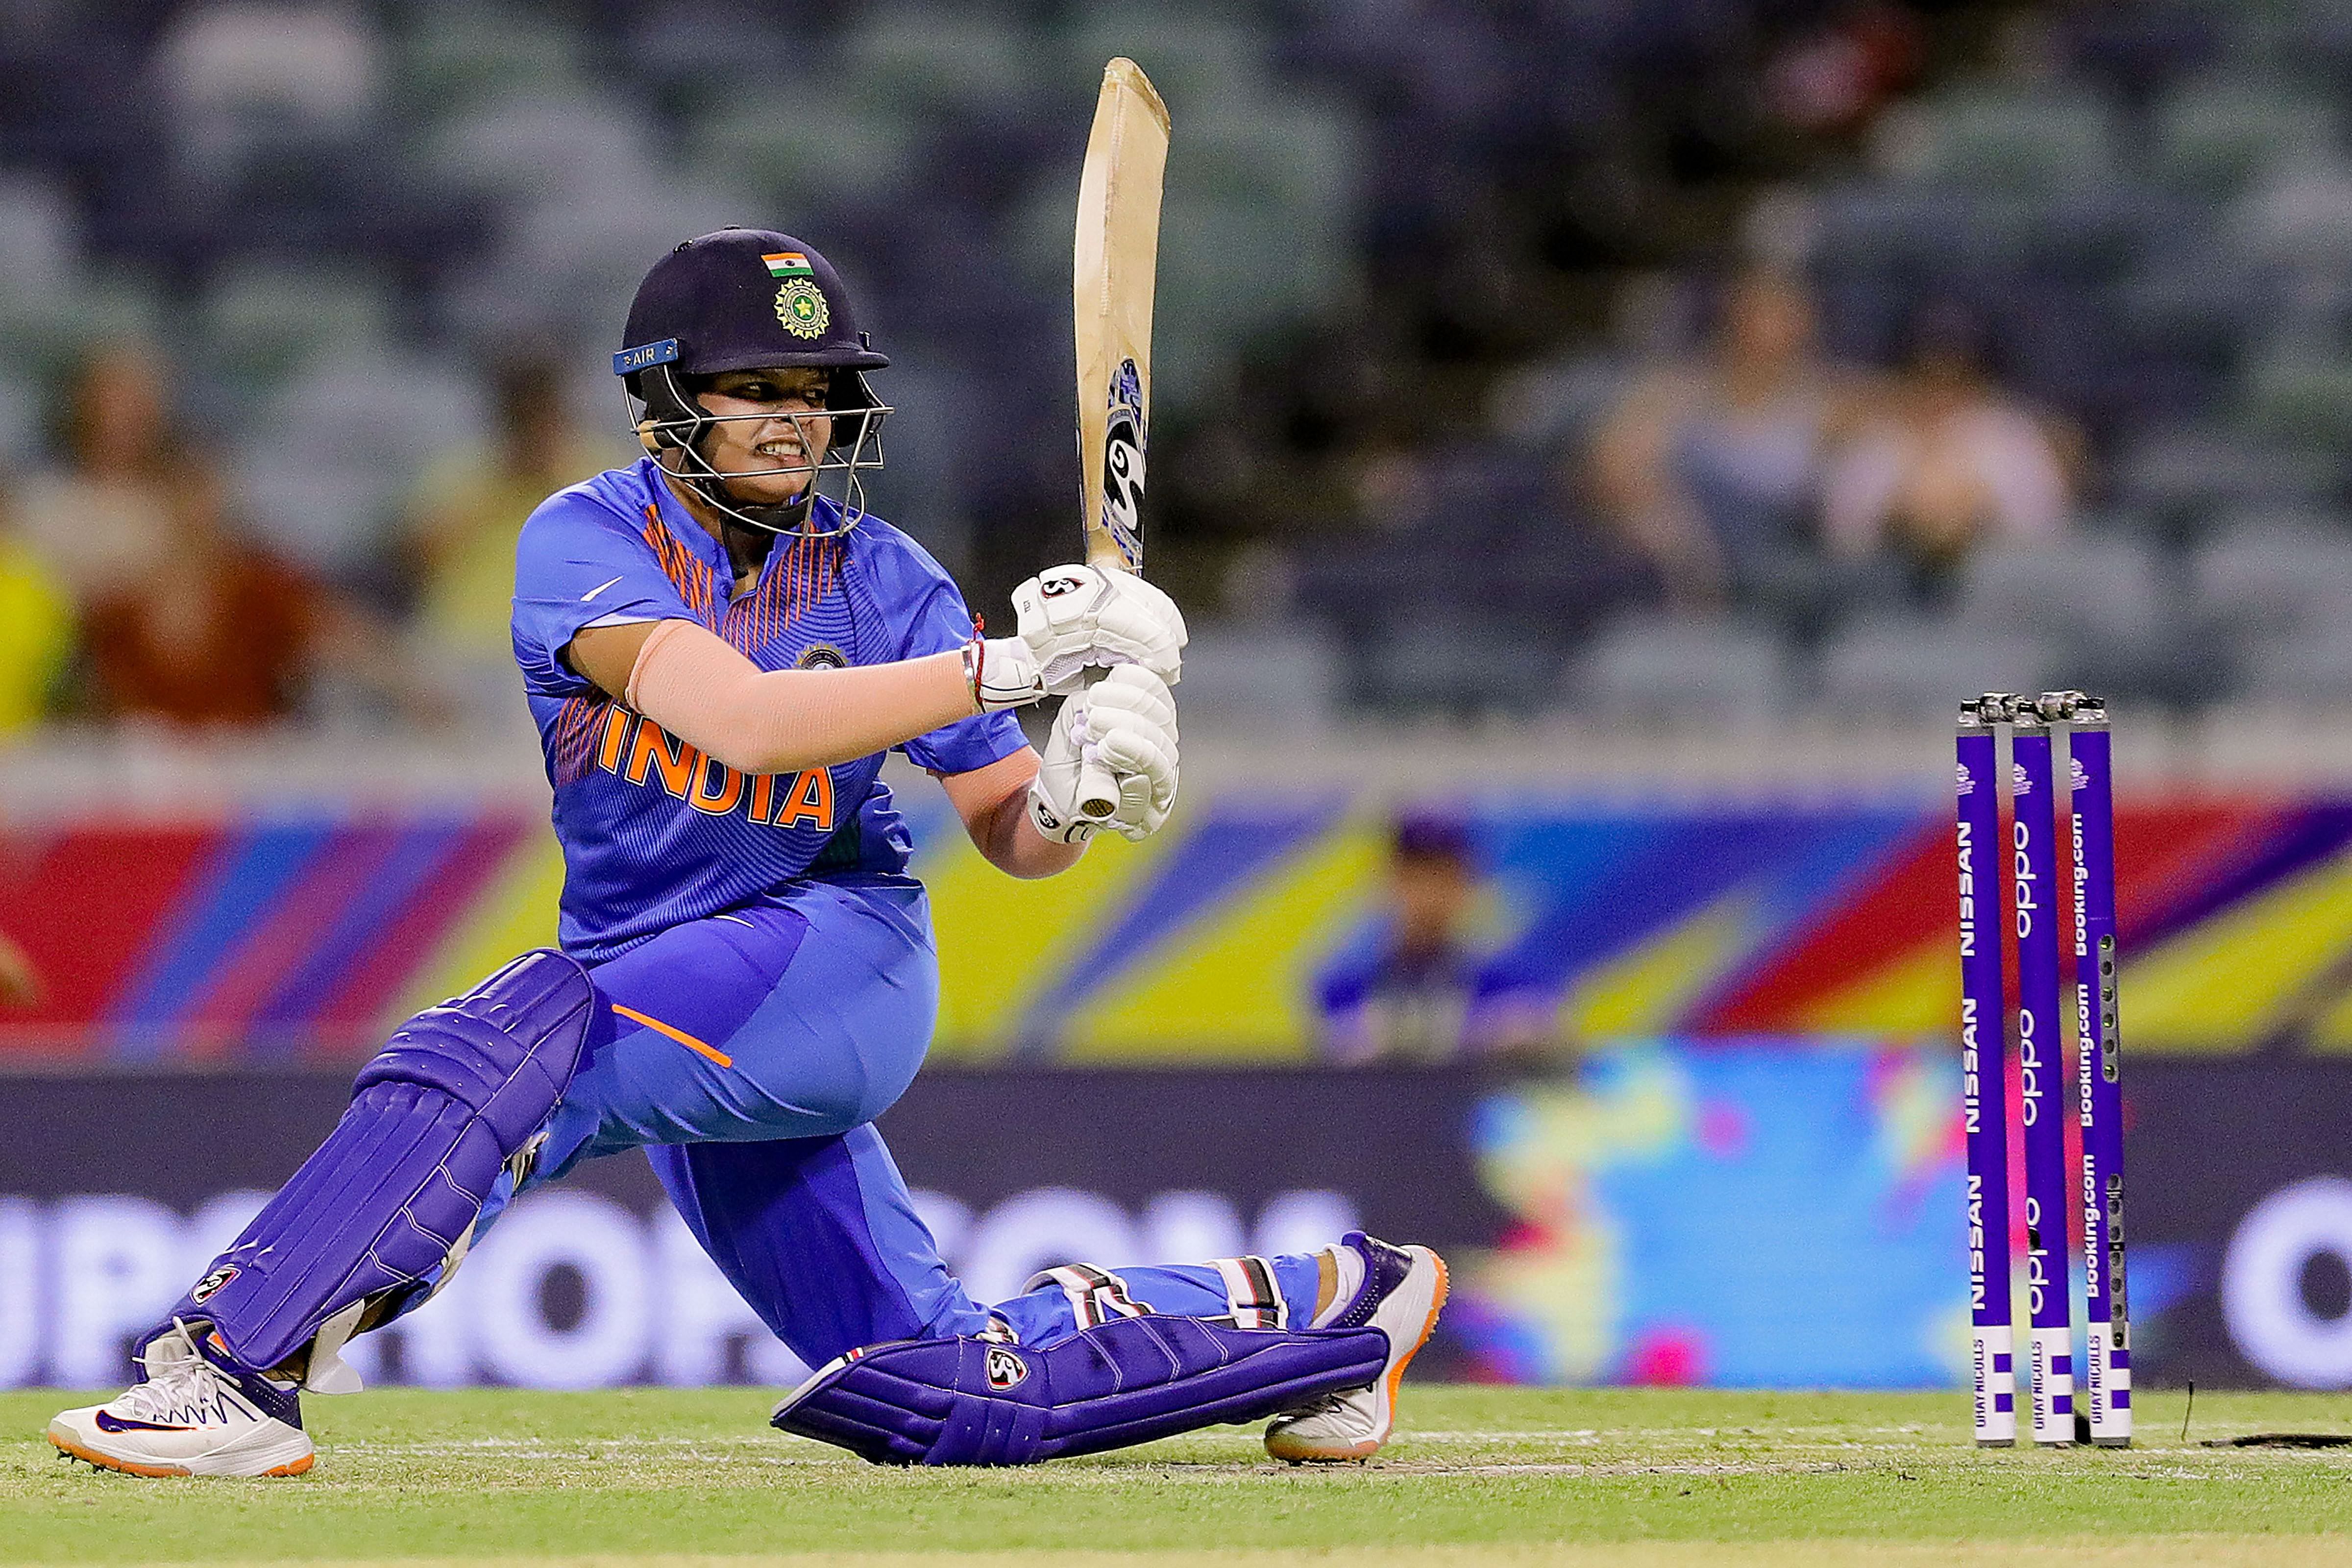 Indian batswoman Shafali Verma plays a shot during the group stage match against Bangladesh in the ICC Women's T20 World Cup, in Perth. (PTI Photo)